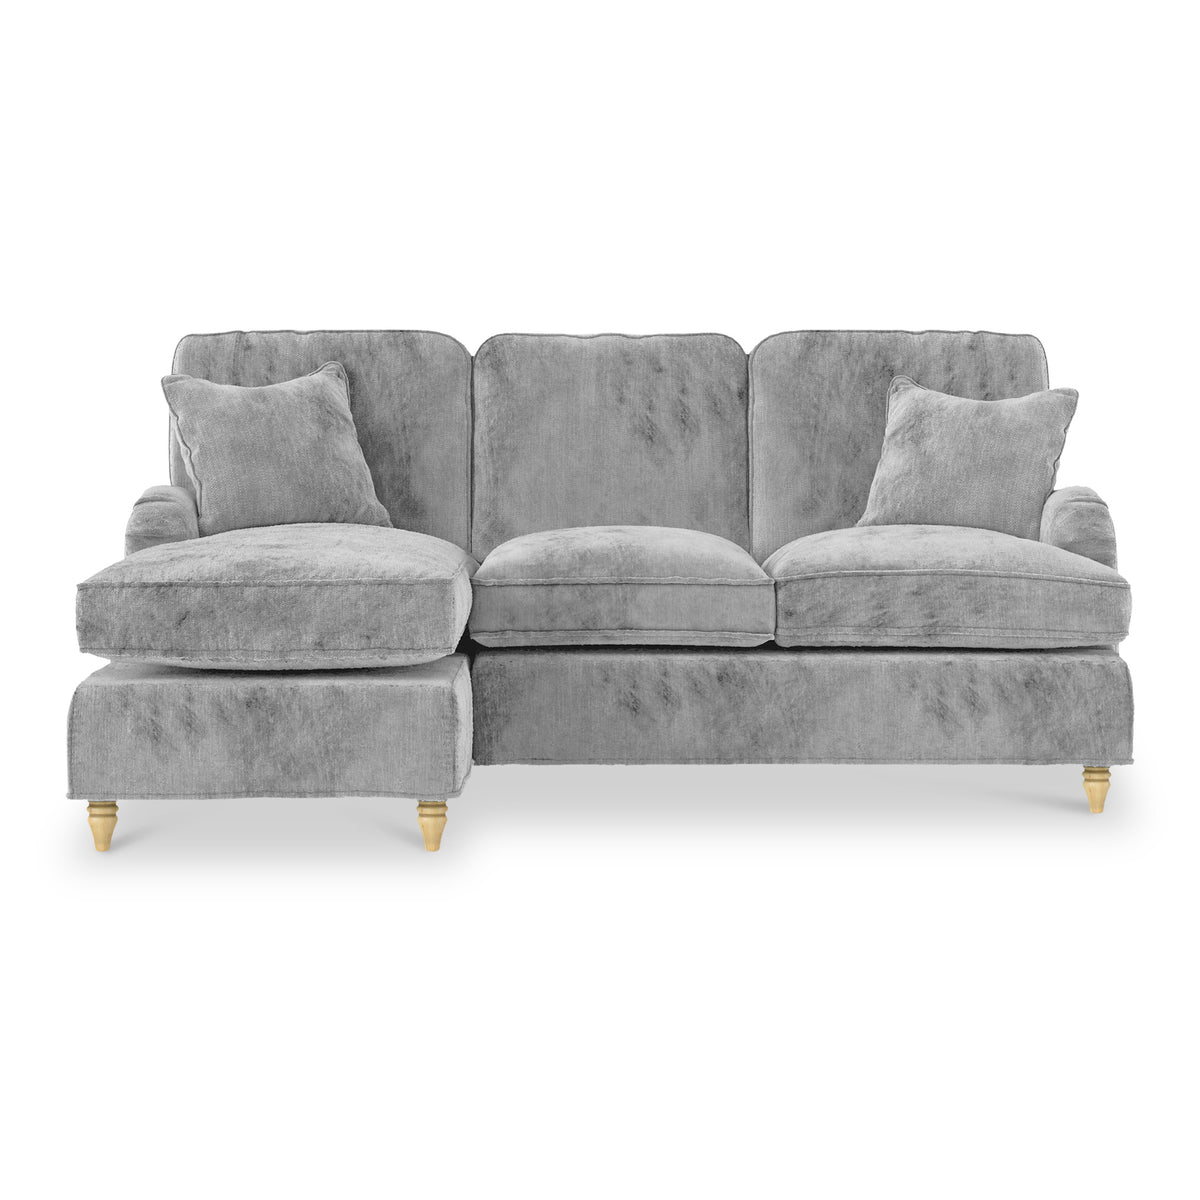 Arthur Ice Grey LH Chaise Sofa from Roseland Furniture